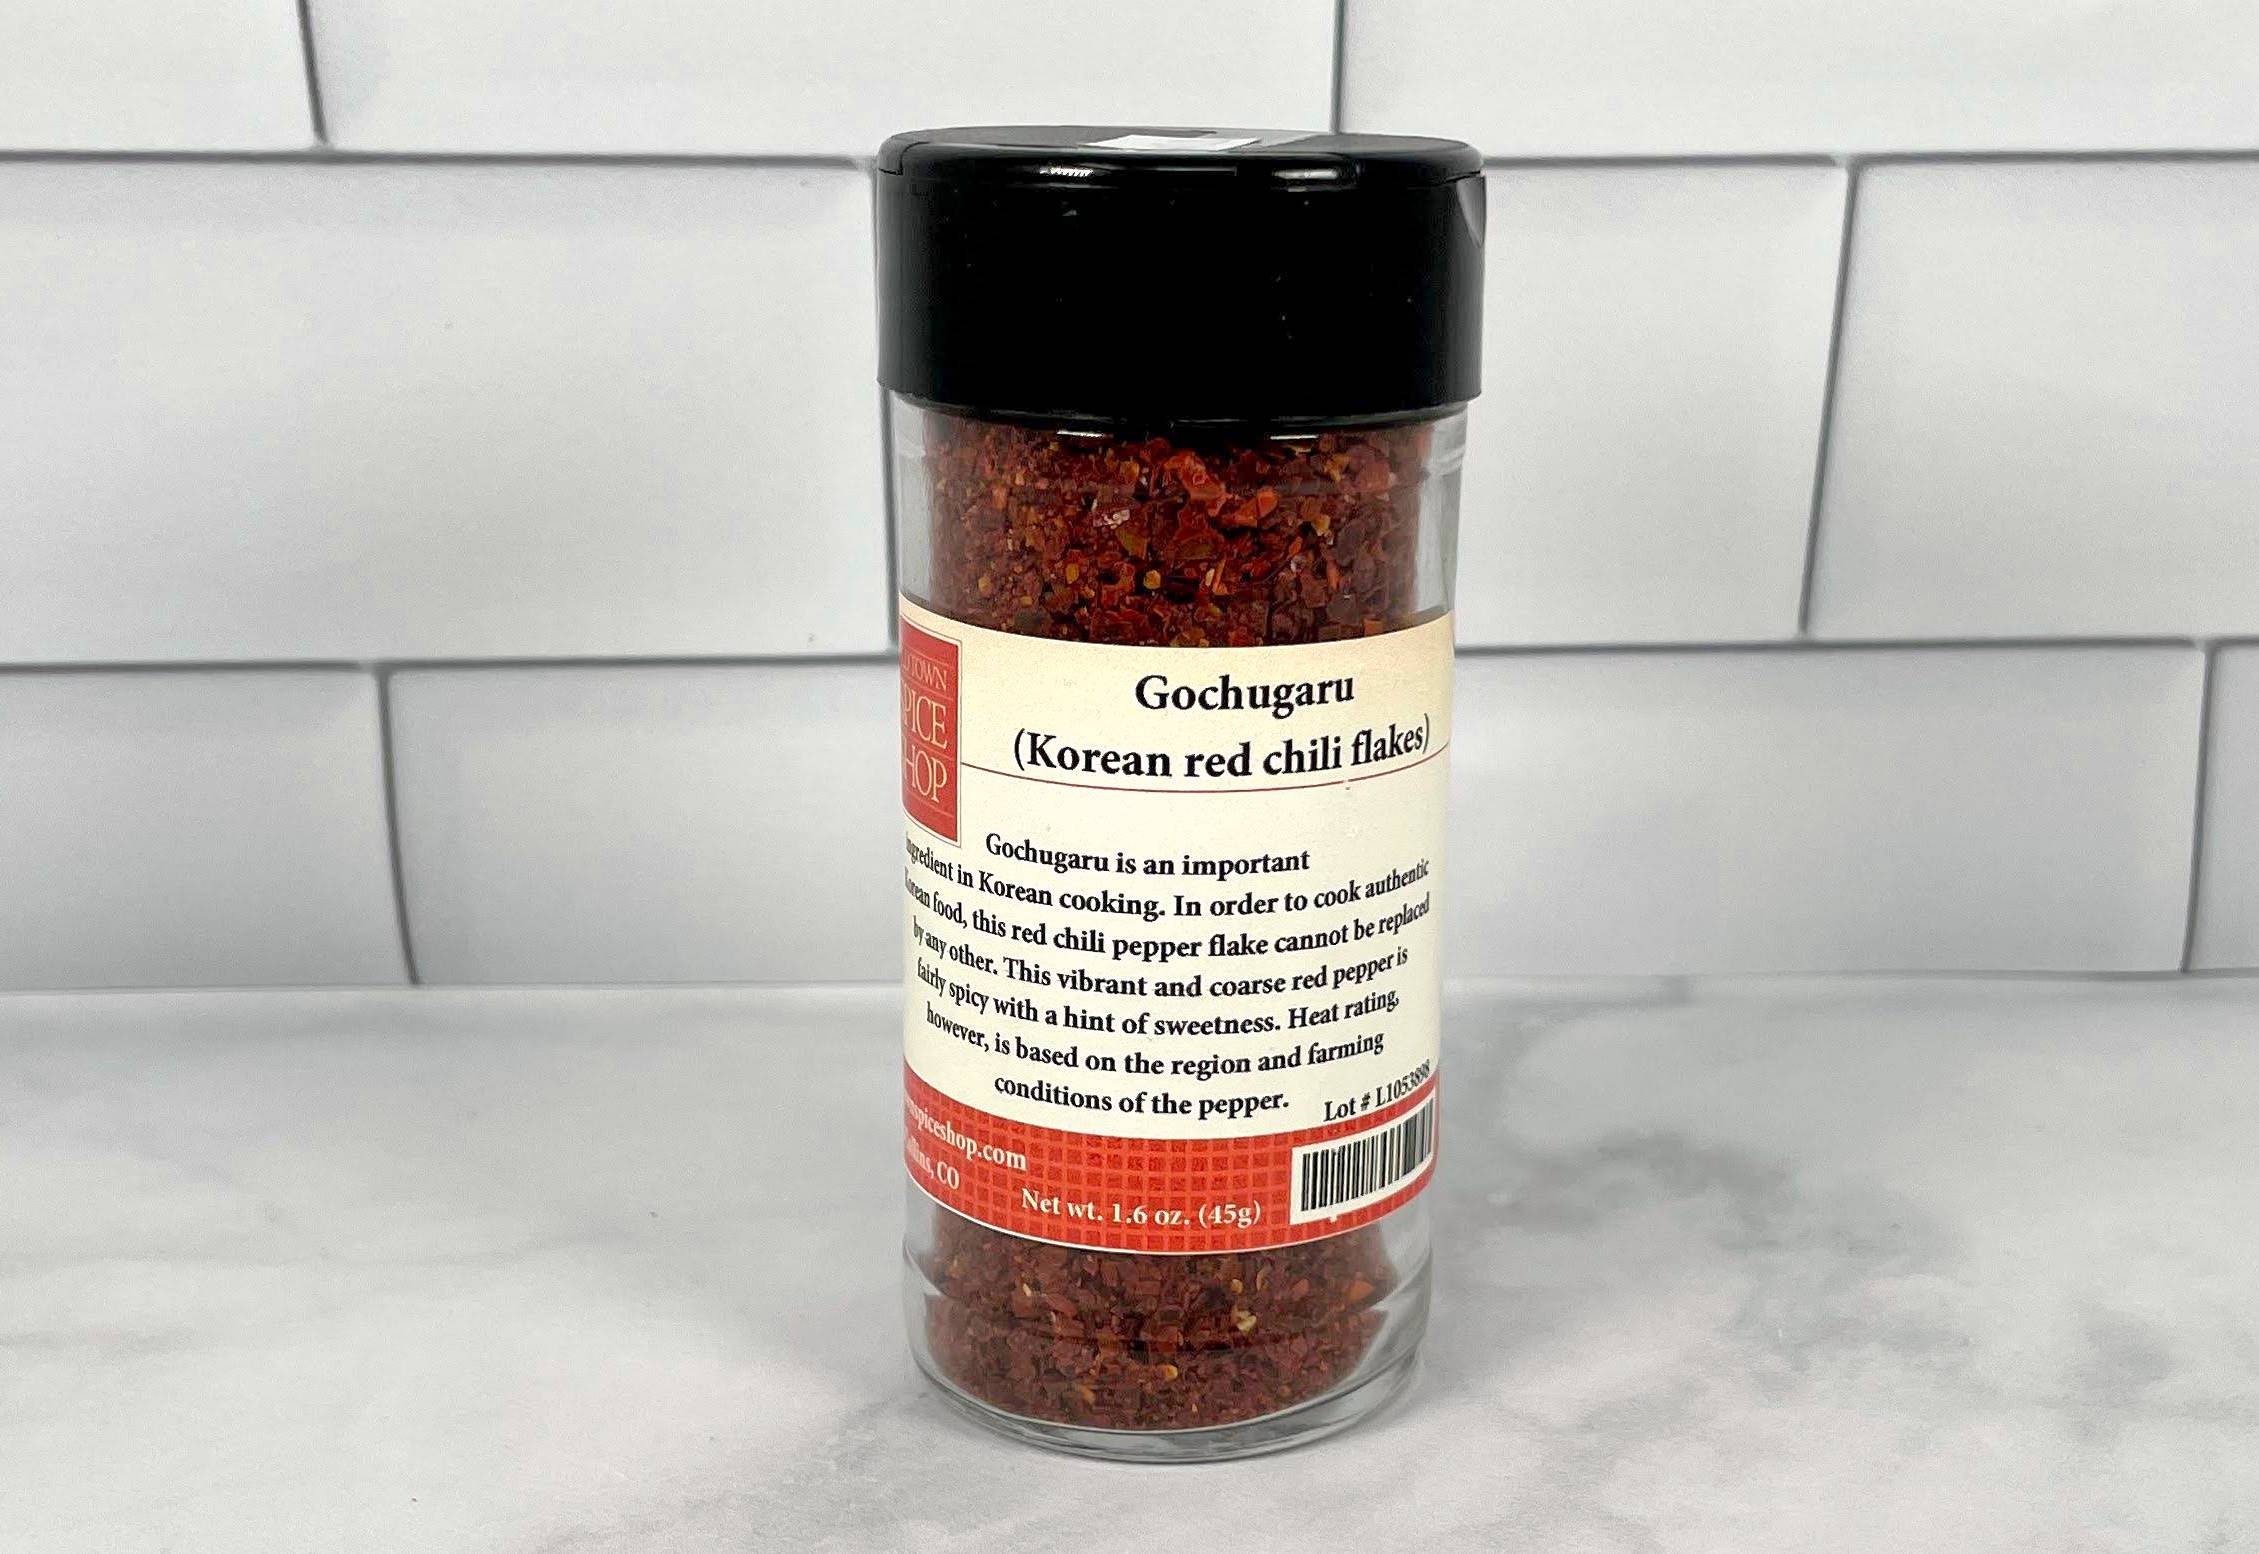 Red Chili Flakes  Tennessee Hot Pepper Company